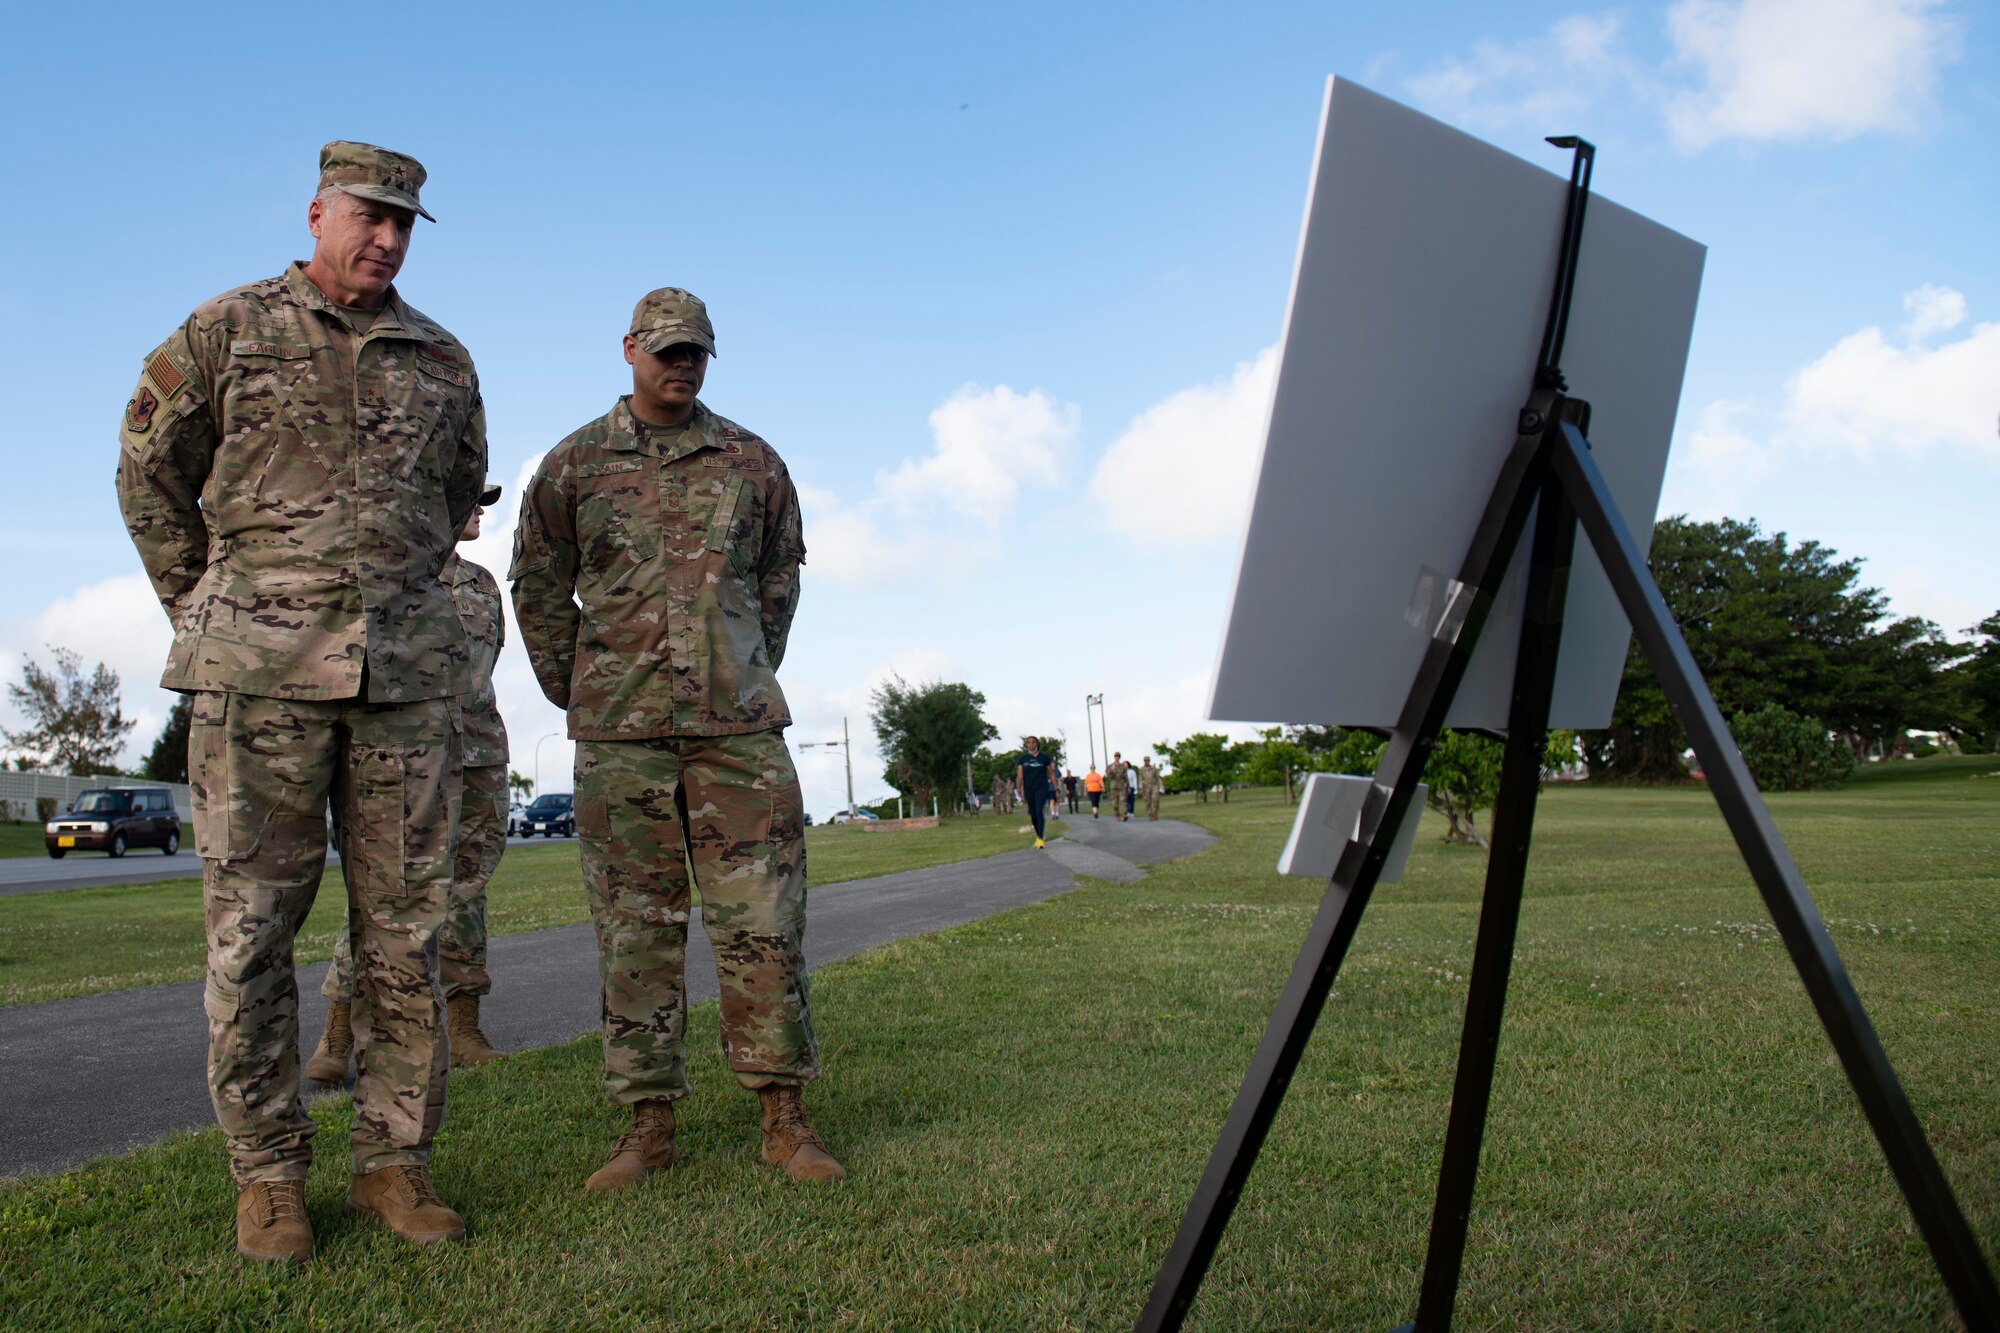 U.S. Air Force Brig. Gen. David Eaglin, 18th Wing commander, left, and Chief Master Sgt. Daniel Cain, Erwin Professional Military Education Center commandant, participate in a silent walk during Days of Remembrance week at Kadena Air Base, Japan, April 25, 2022. The U.S. Congress established the Days of Remembrance as the nation’s annual commemoration of the Holocaust. (U.S. Air Force photo by Senior Airman Jessi Monte)